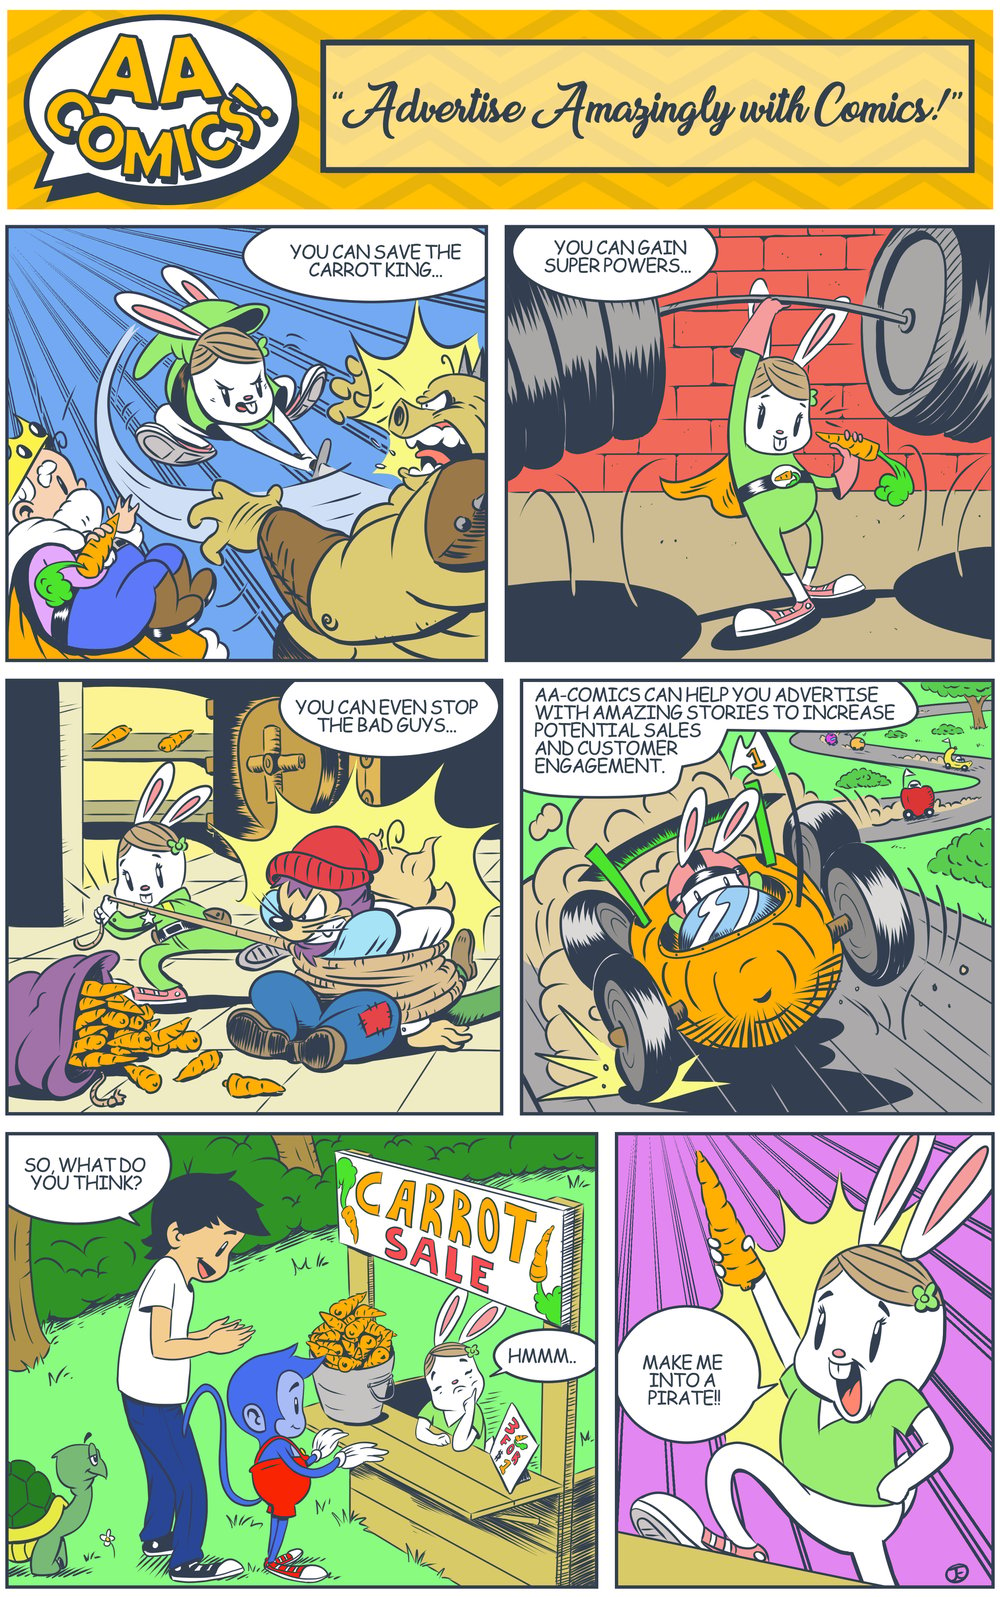 This is a AA-Comics sample where Mel Lemon and Sam offer Cassie the opportunity to become anyone she wants to be in her own comic strip to help her sell more carrots. 